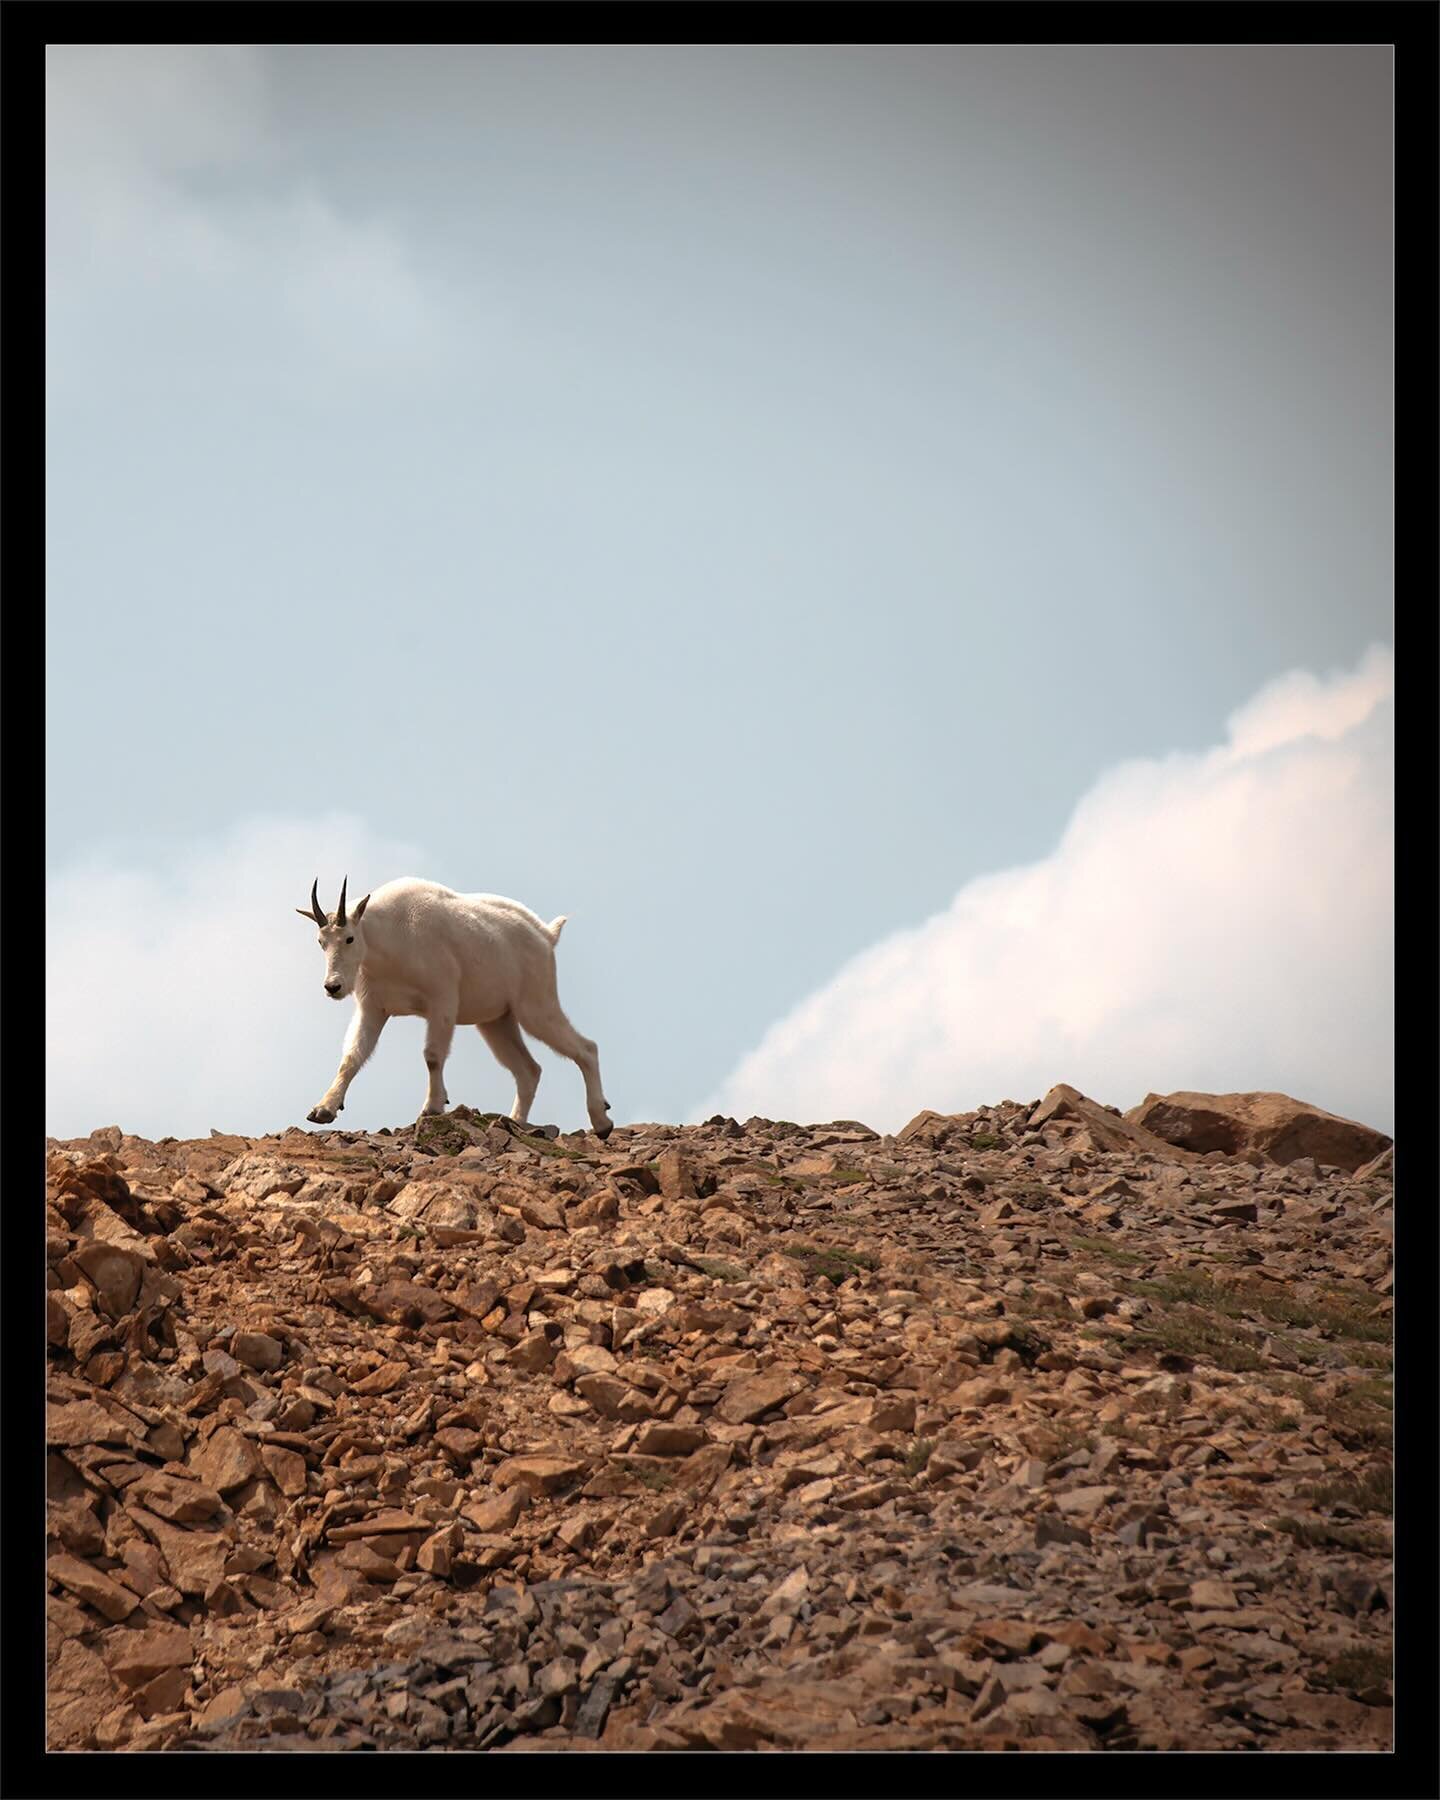 🚨 ⏮️⏮️ SWIPE SERIES - DON&rsquo;T MISS ⏭️⏭️ 🚨 

Argentine Pass off-roading with the Lyons&rsquo; - we came across a Rocky Mountain Goat doing what Rocky Mountain Goats do; risking their lives to scale cliffs! They don&rsquo;t for survival but at a 